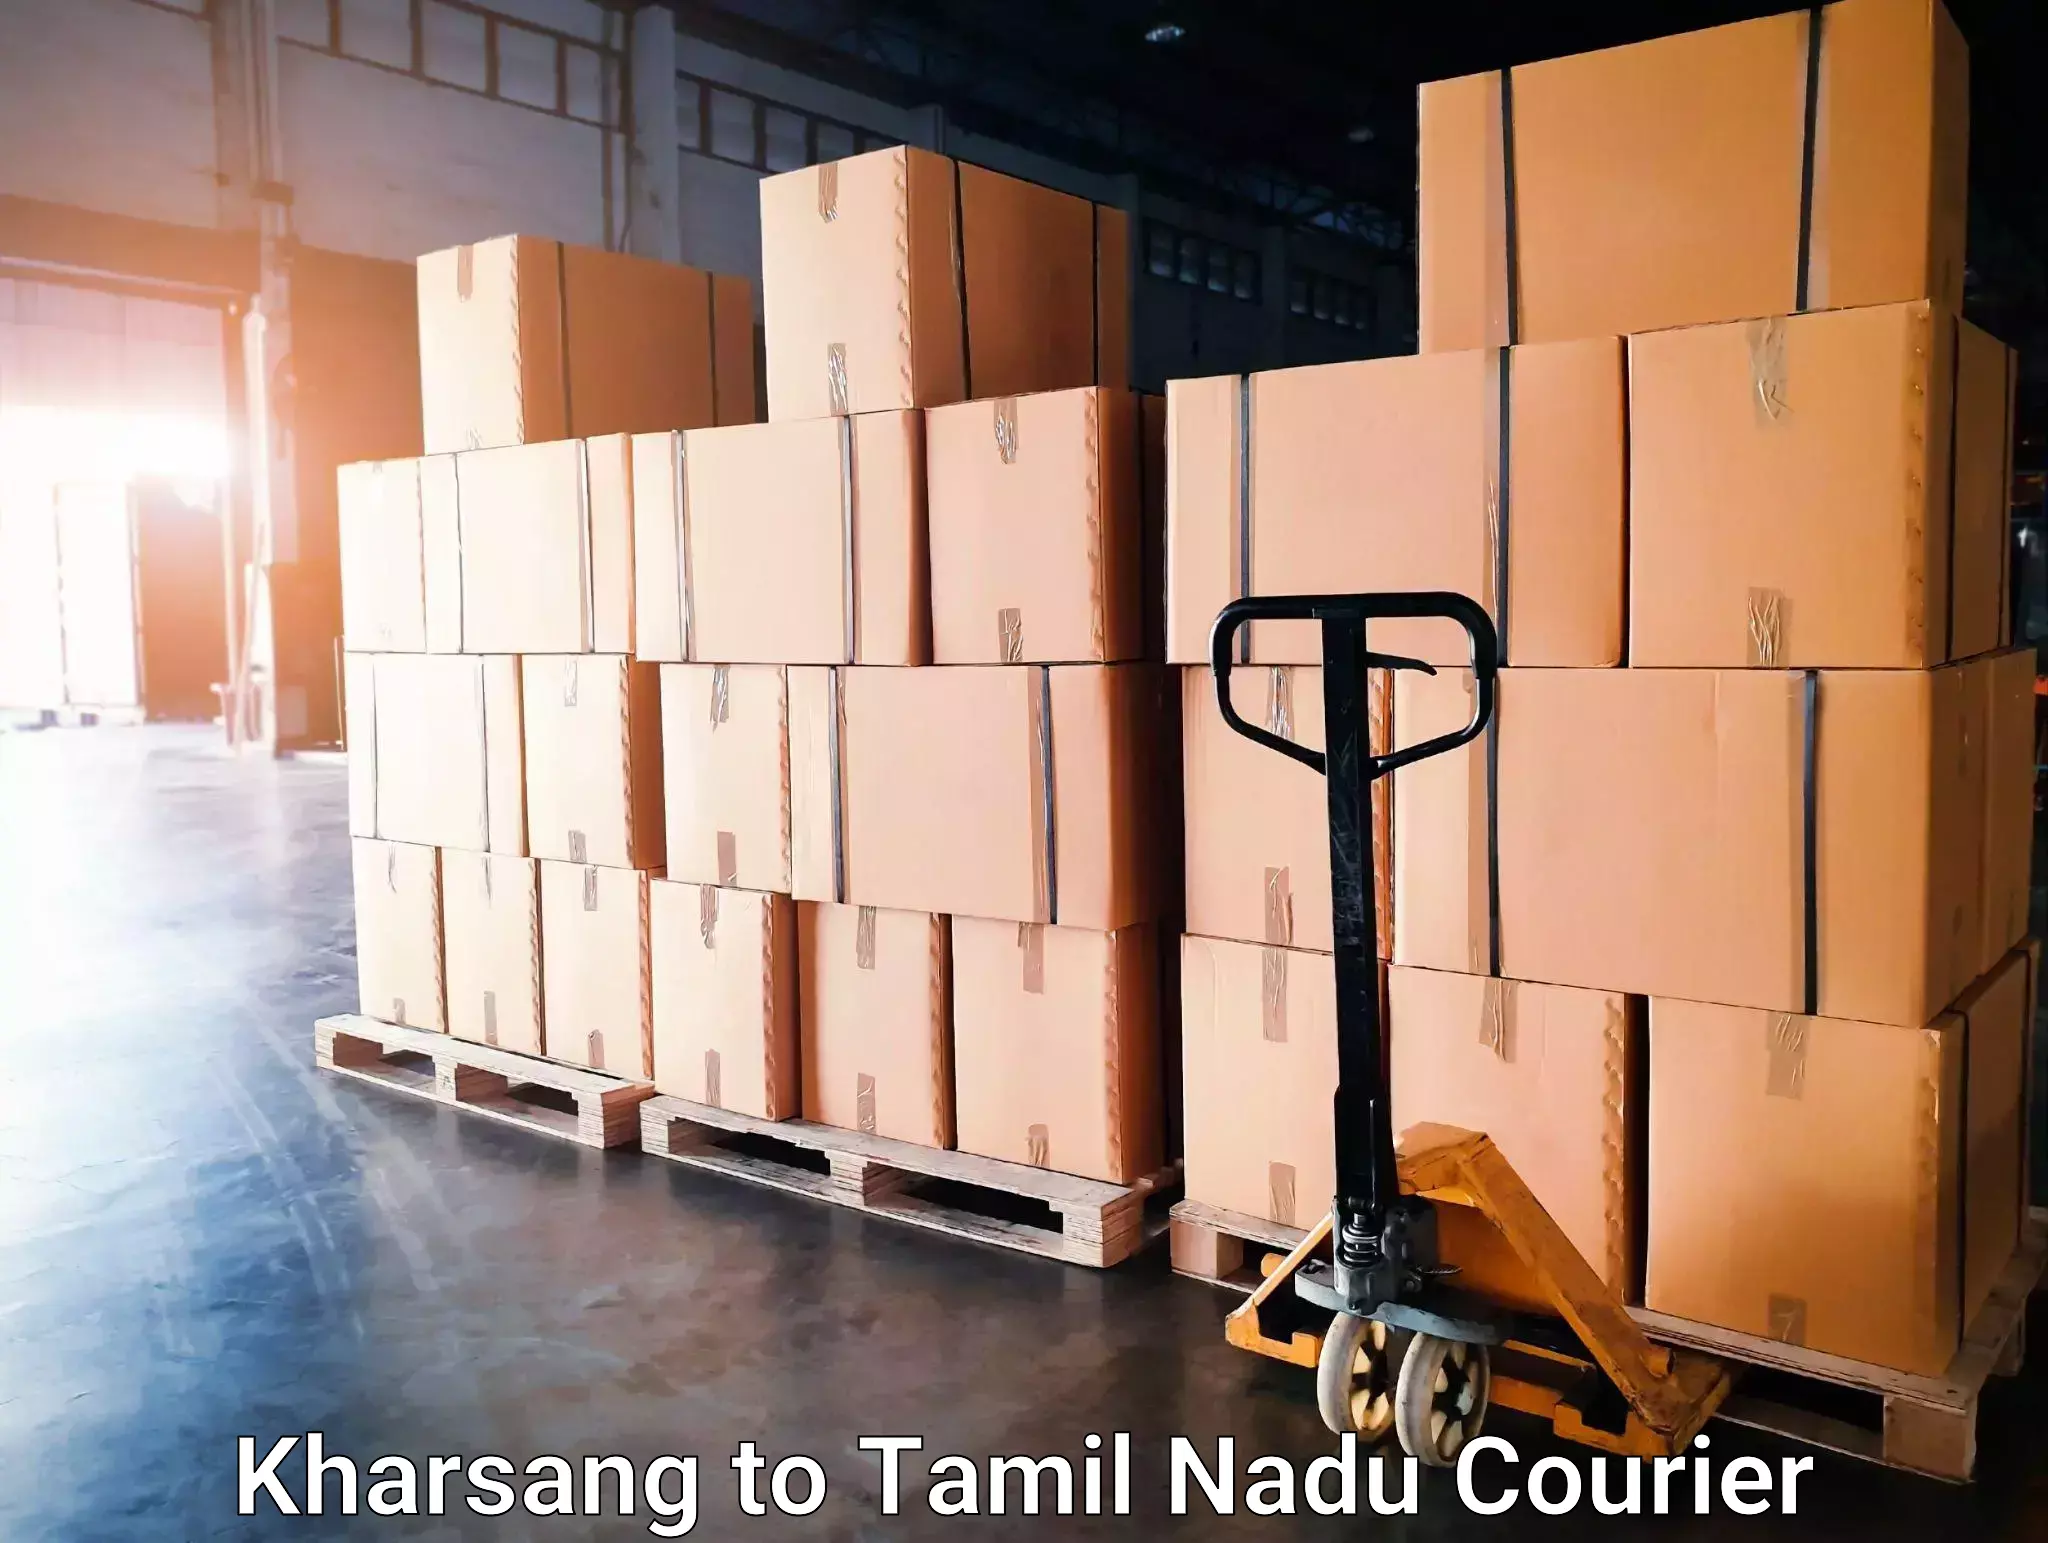 Subscription-based courier Kharsang to Cheyyar